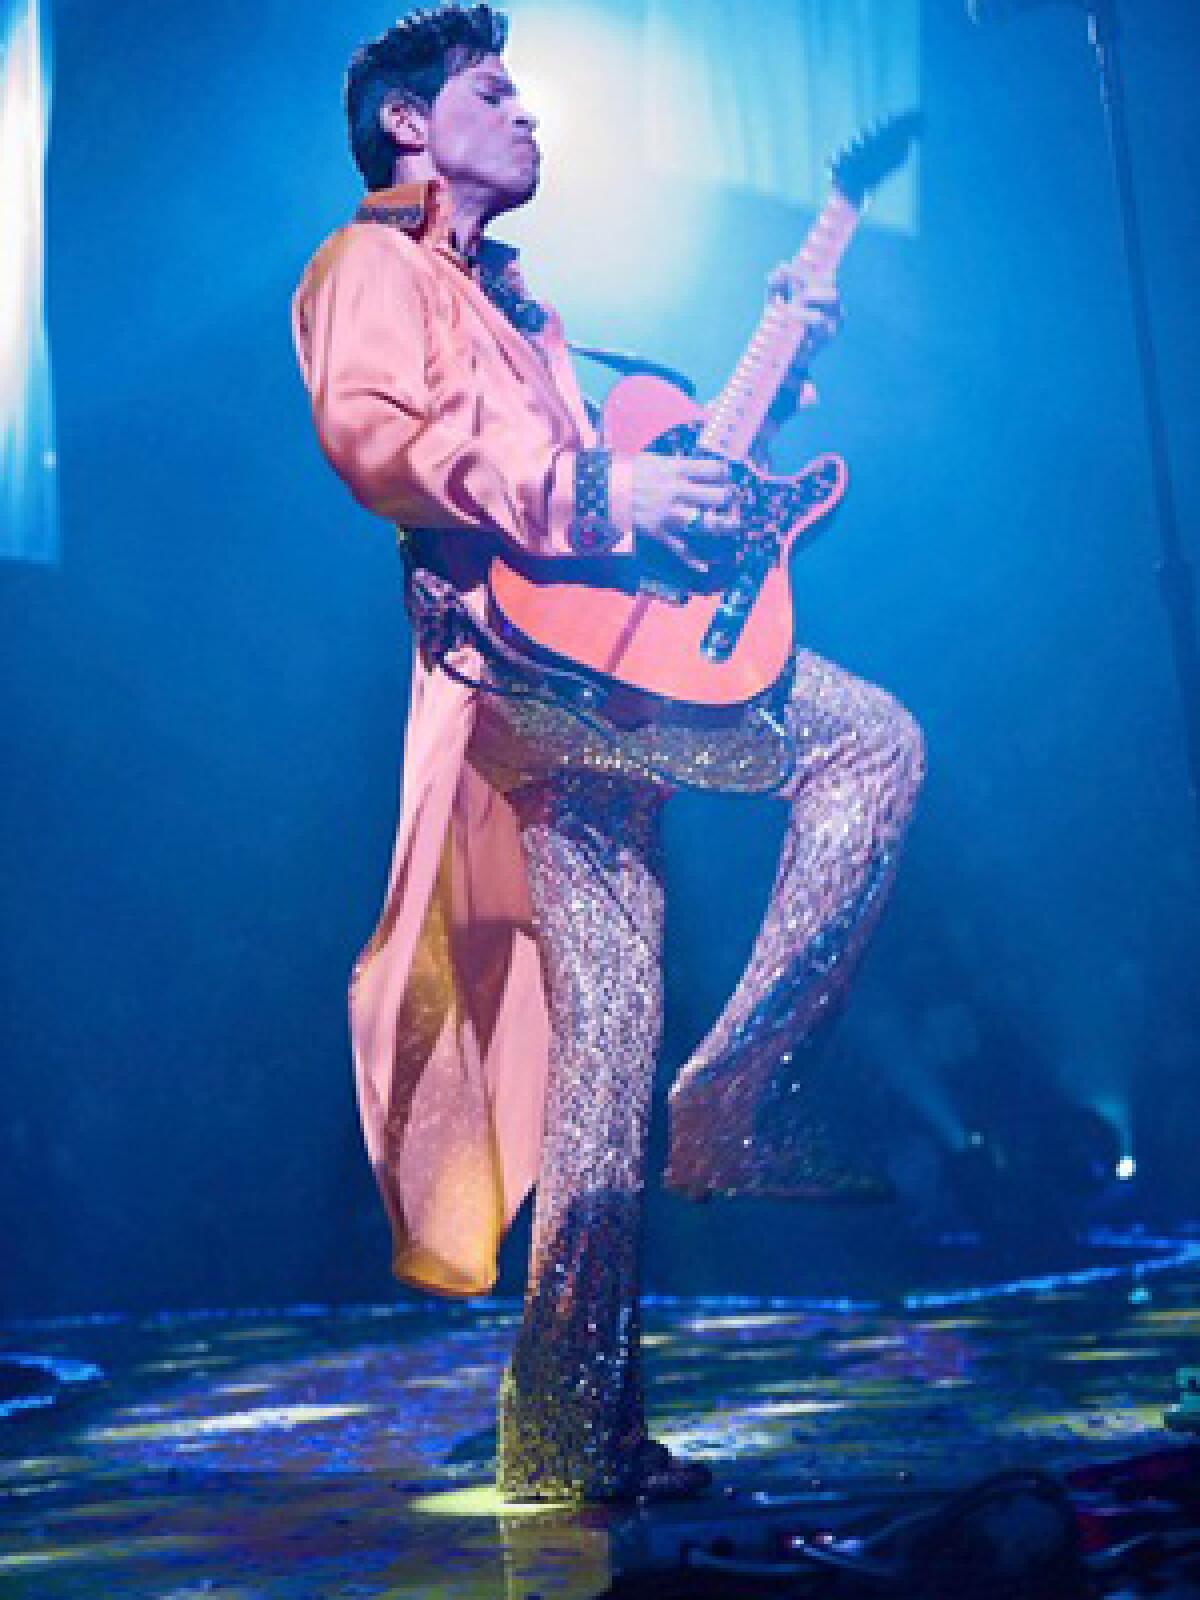 $25 MAN: Prince's 21-concert run, primarily at the Forum, is coming to an end. He's featured starry guest artists and drastically revamped his set list each night.